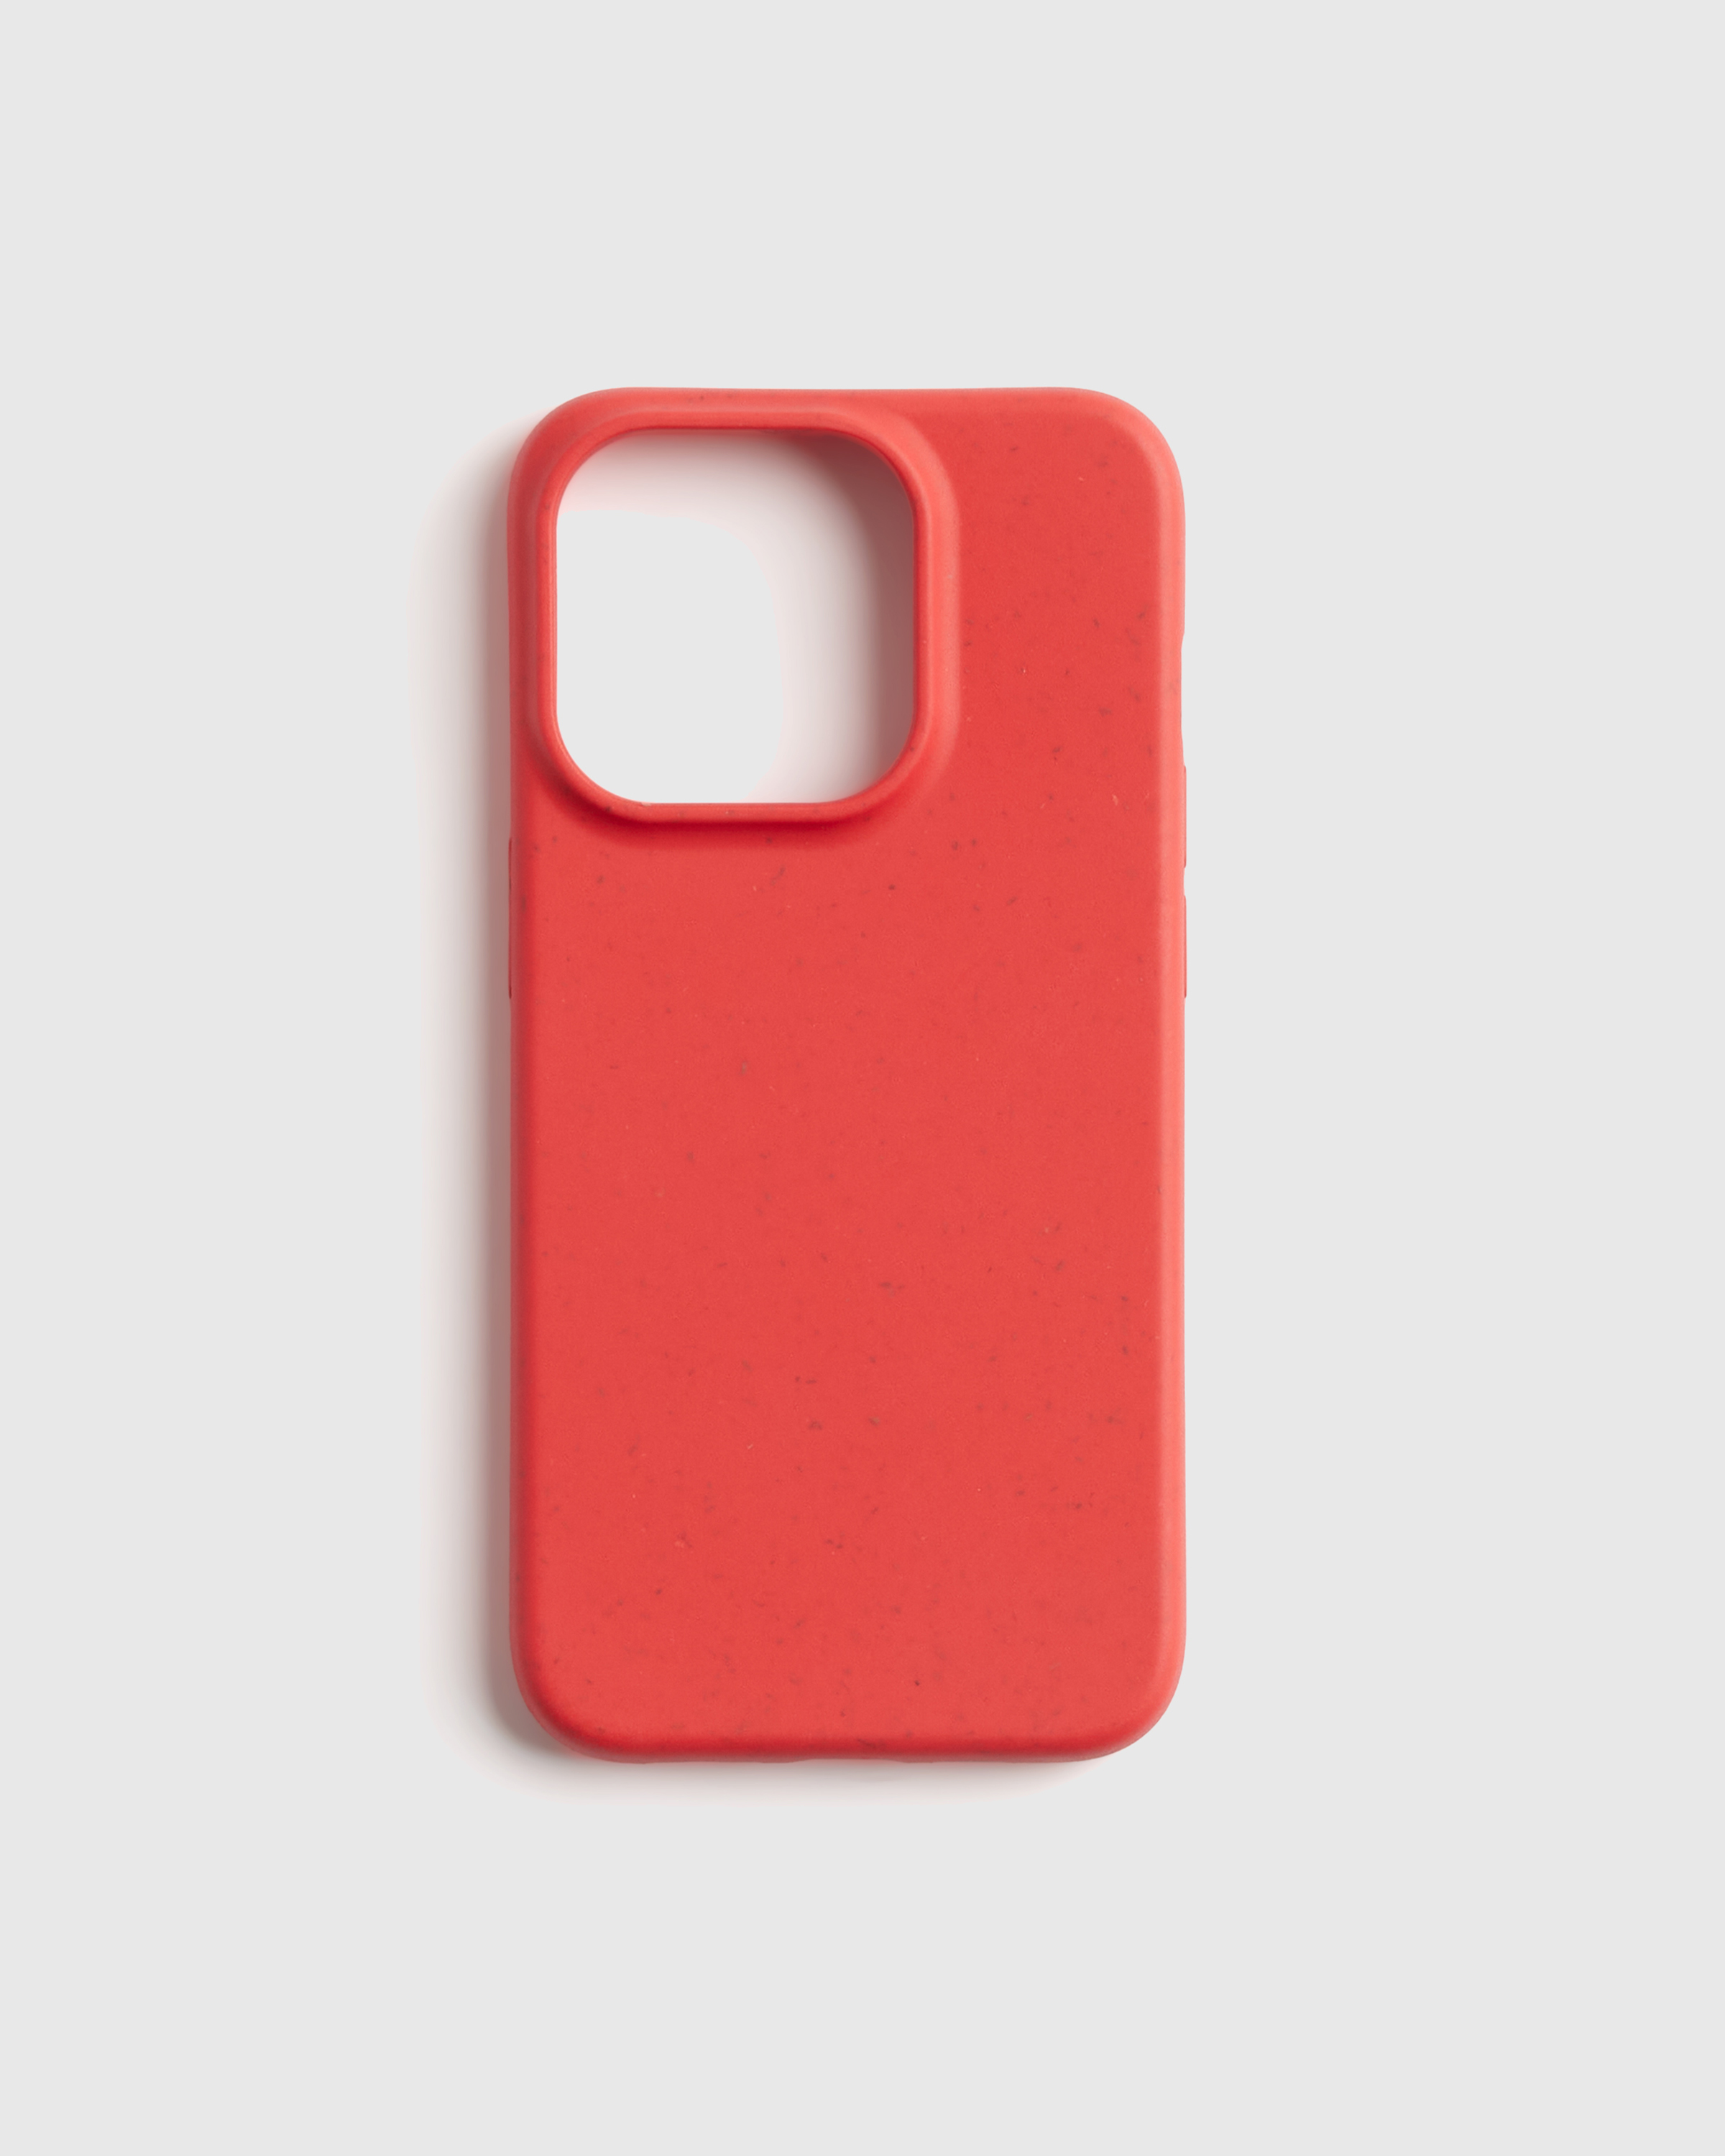 Quince Biodegradable Iphone Case In Red